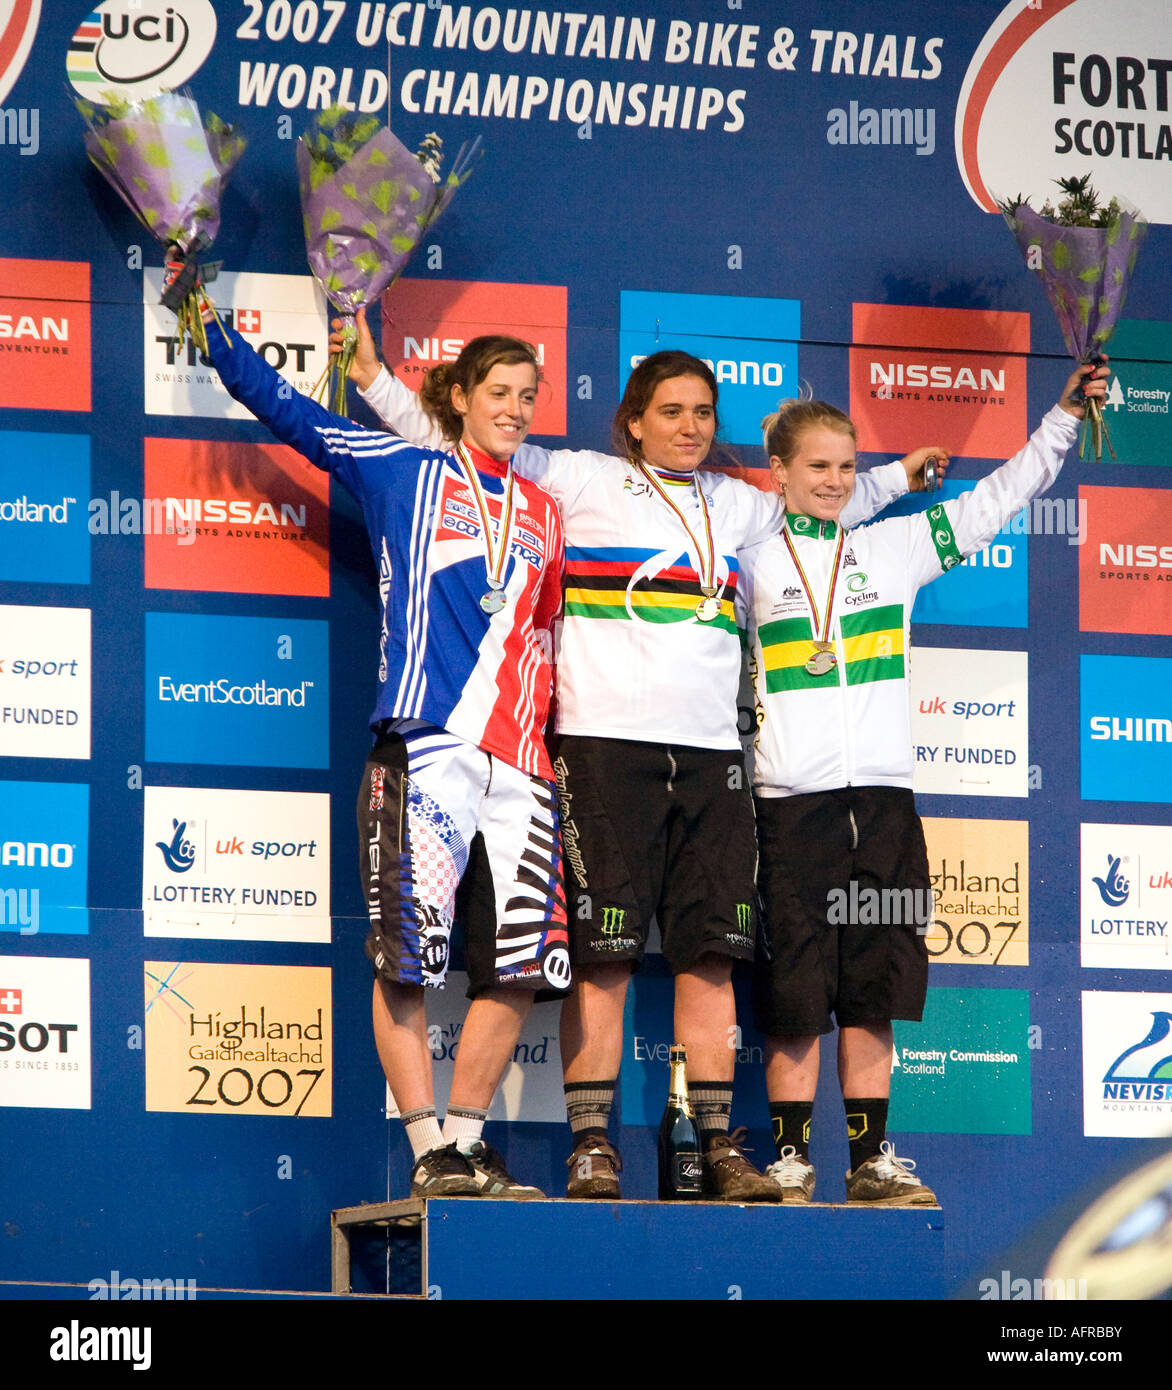 Winners of the Junior Womens downhill race at the UCI World Championships race at Fort William 2007 Stock Photo